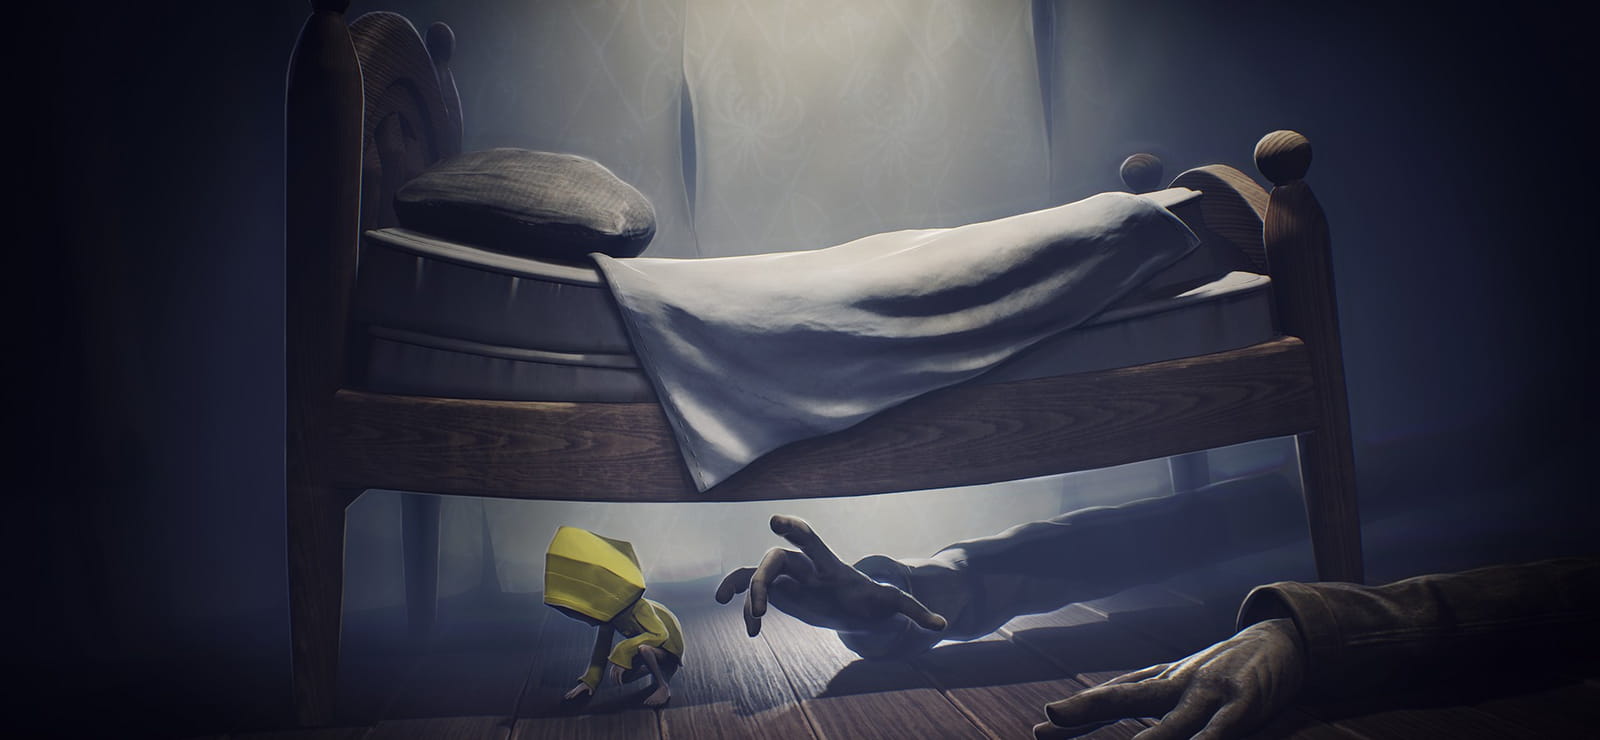 Little Nightmares: Secrets Of The Maw Expansion Pass